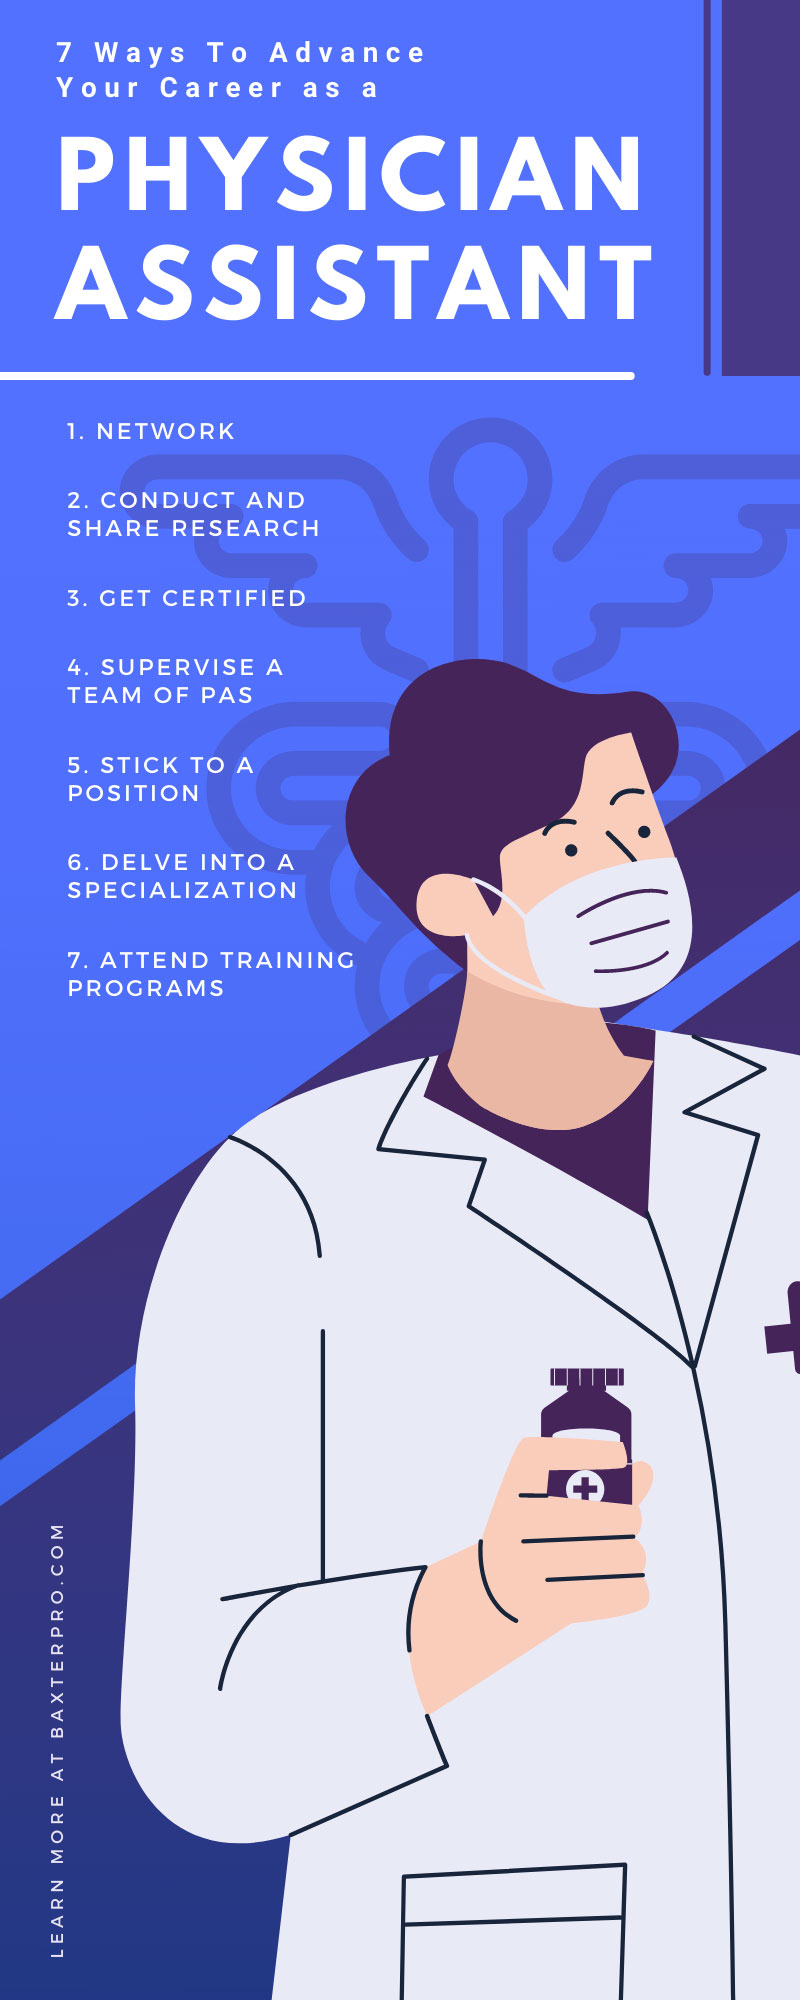 7 Ways To Advance Your Career as a Physician Assistant